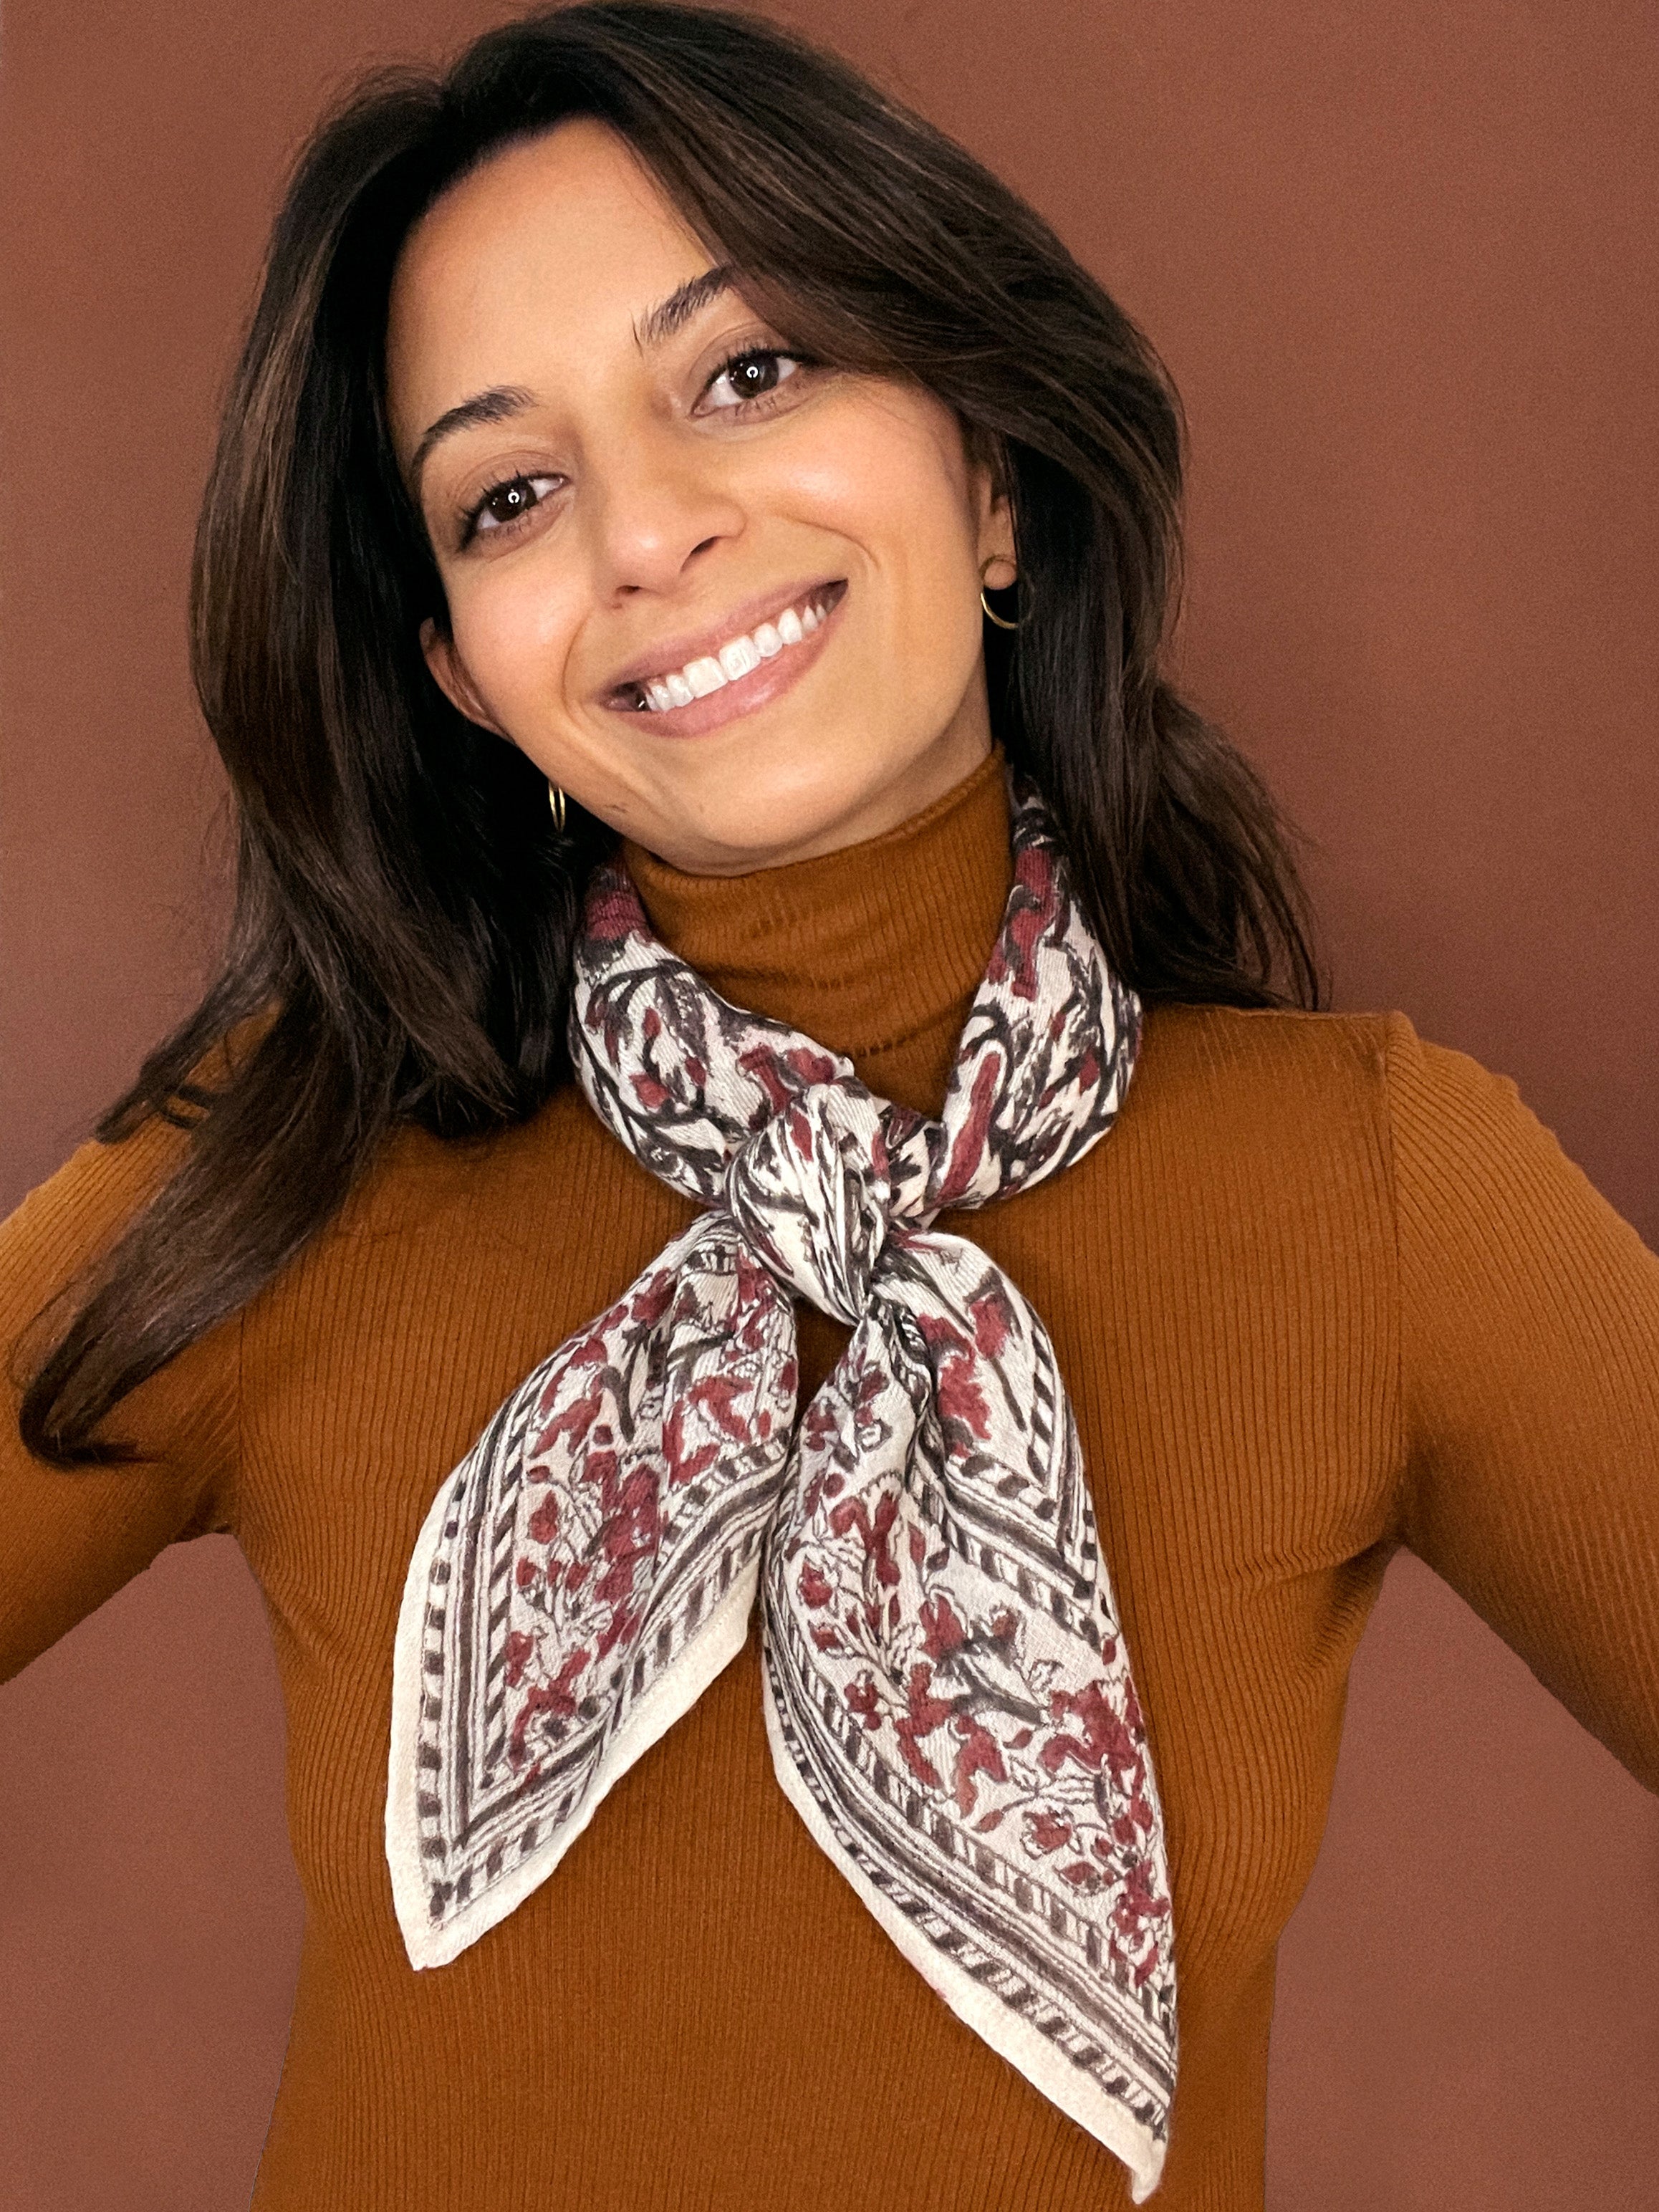 Model wearing the block printed Lana bandana tied around the neck against a brown background